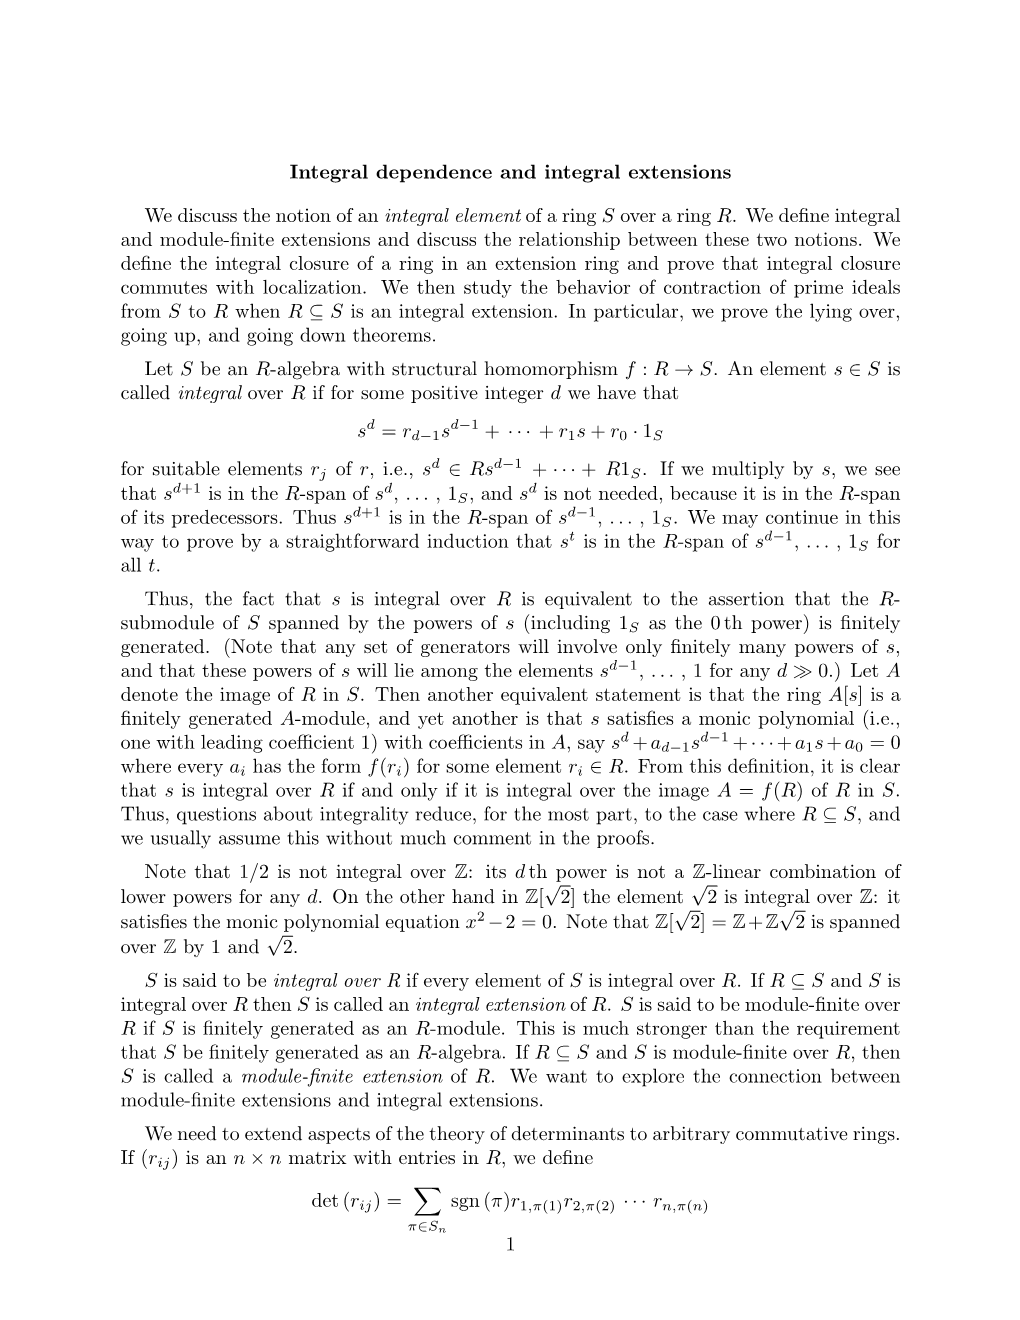 Integral Extensions and Integral Dependence